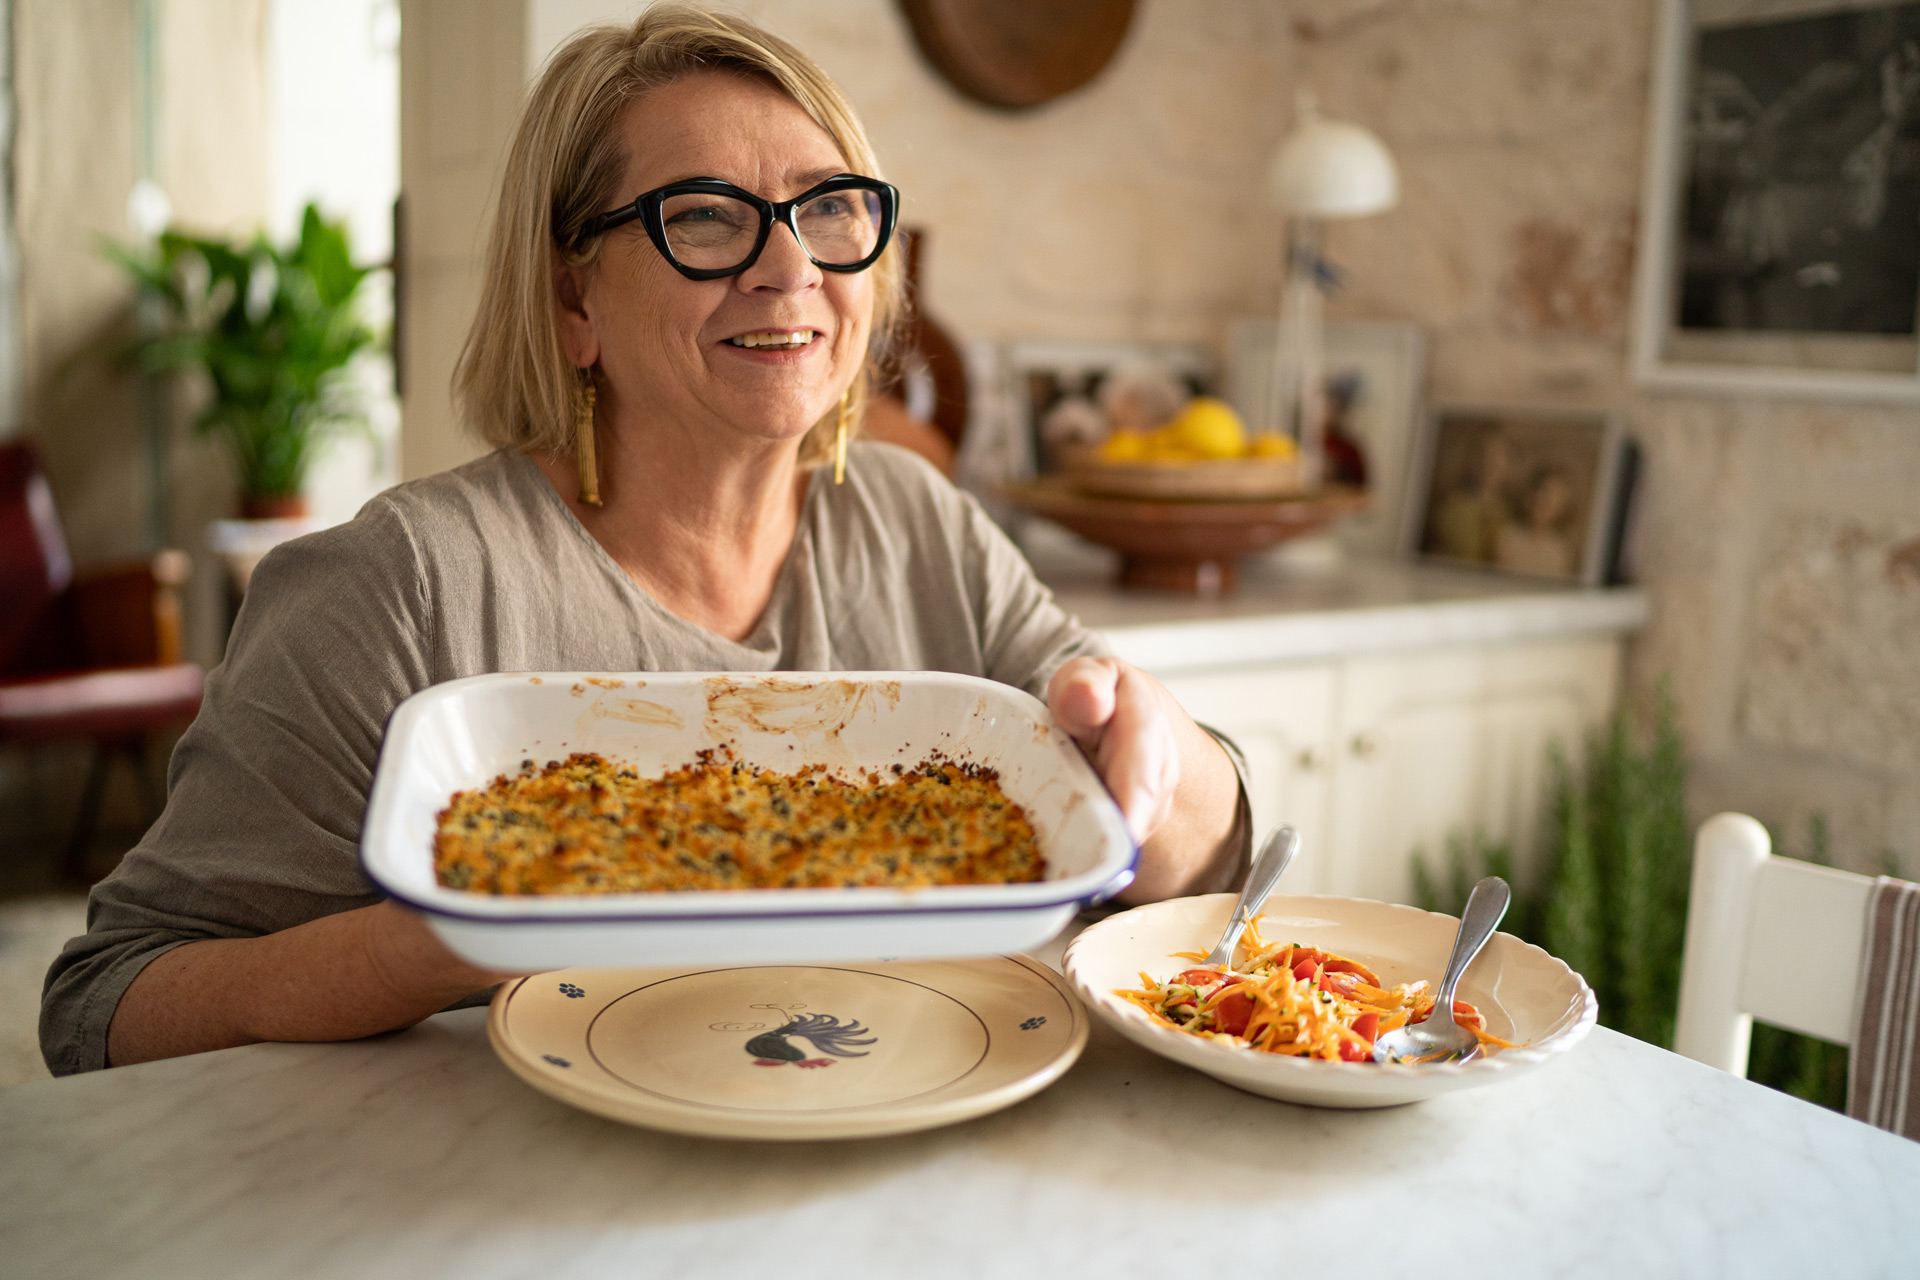 Sophie Grigson On The New Season Of Her TV Show Slice of Italy